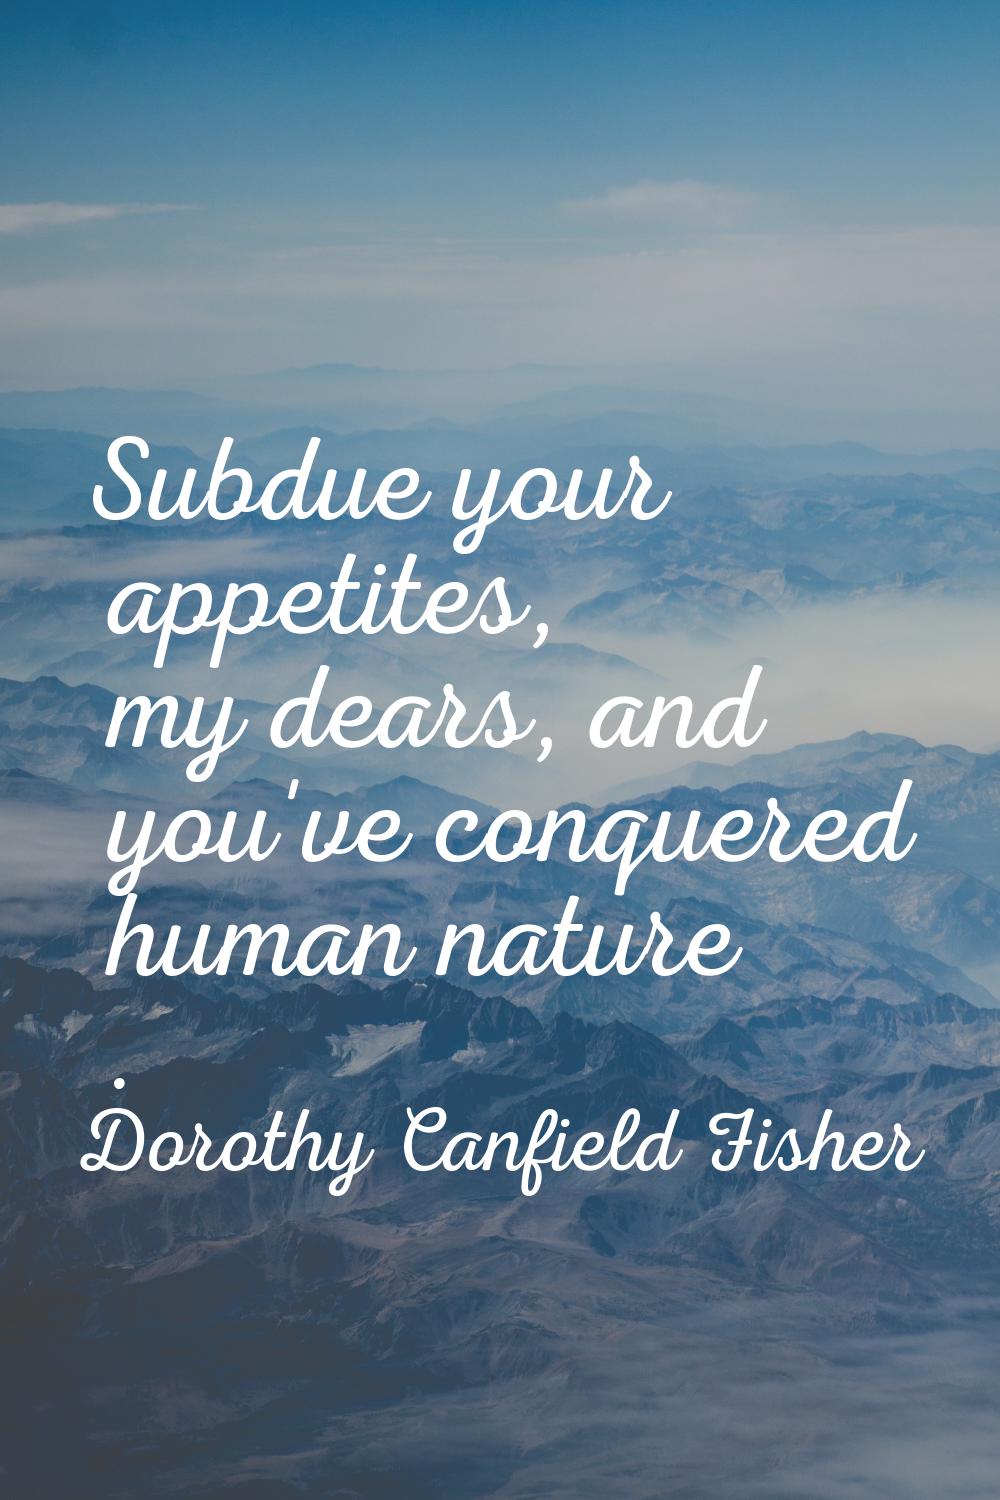 Subdue your appetites, my dears, and you've conquered human nature .